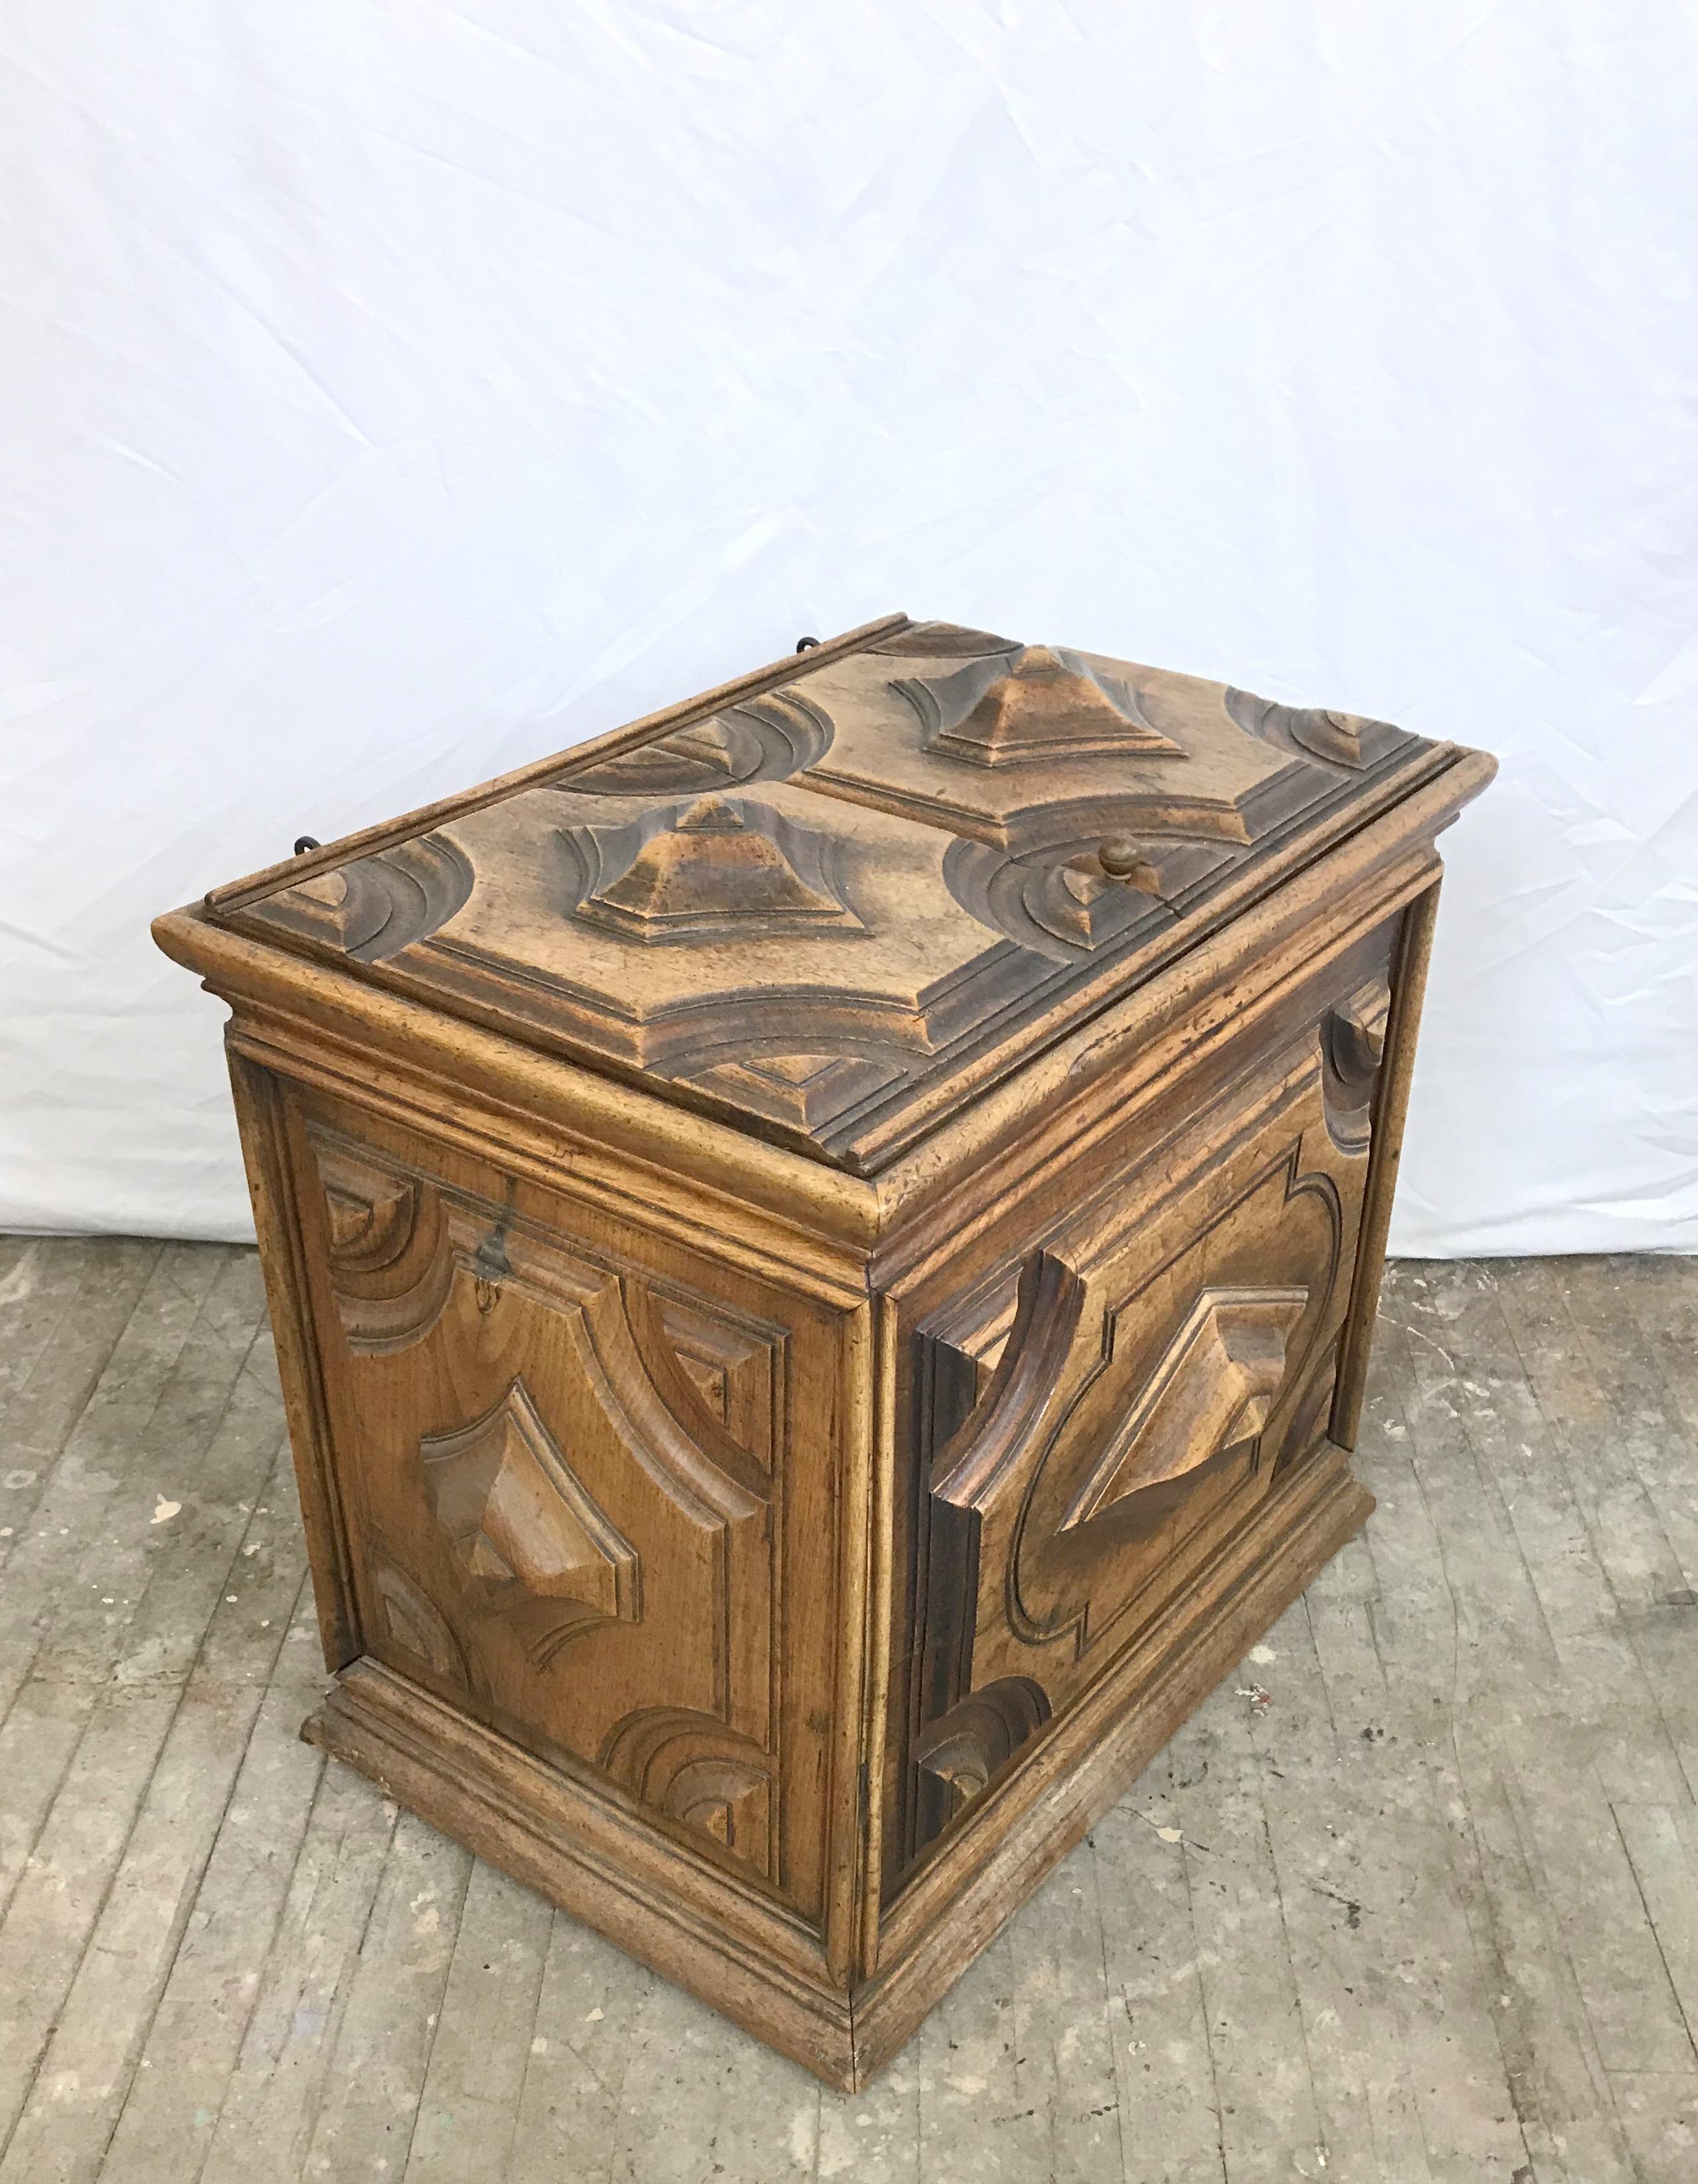 Relief Carved French 18th Century Chest from Academy Award Winner Elmo Williams In Good Condition For Sale In Portland, OR